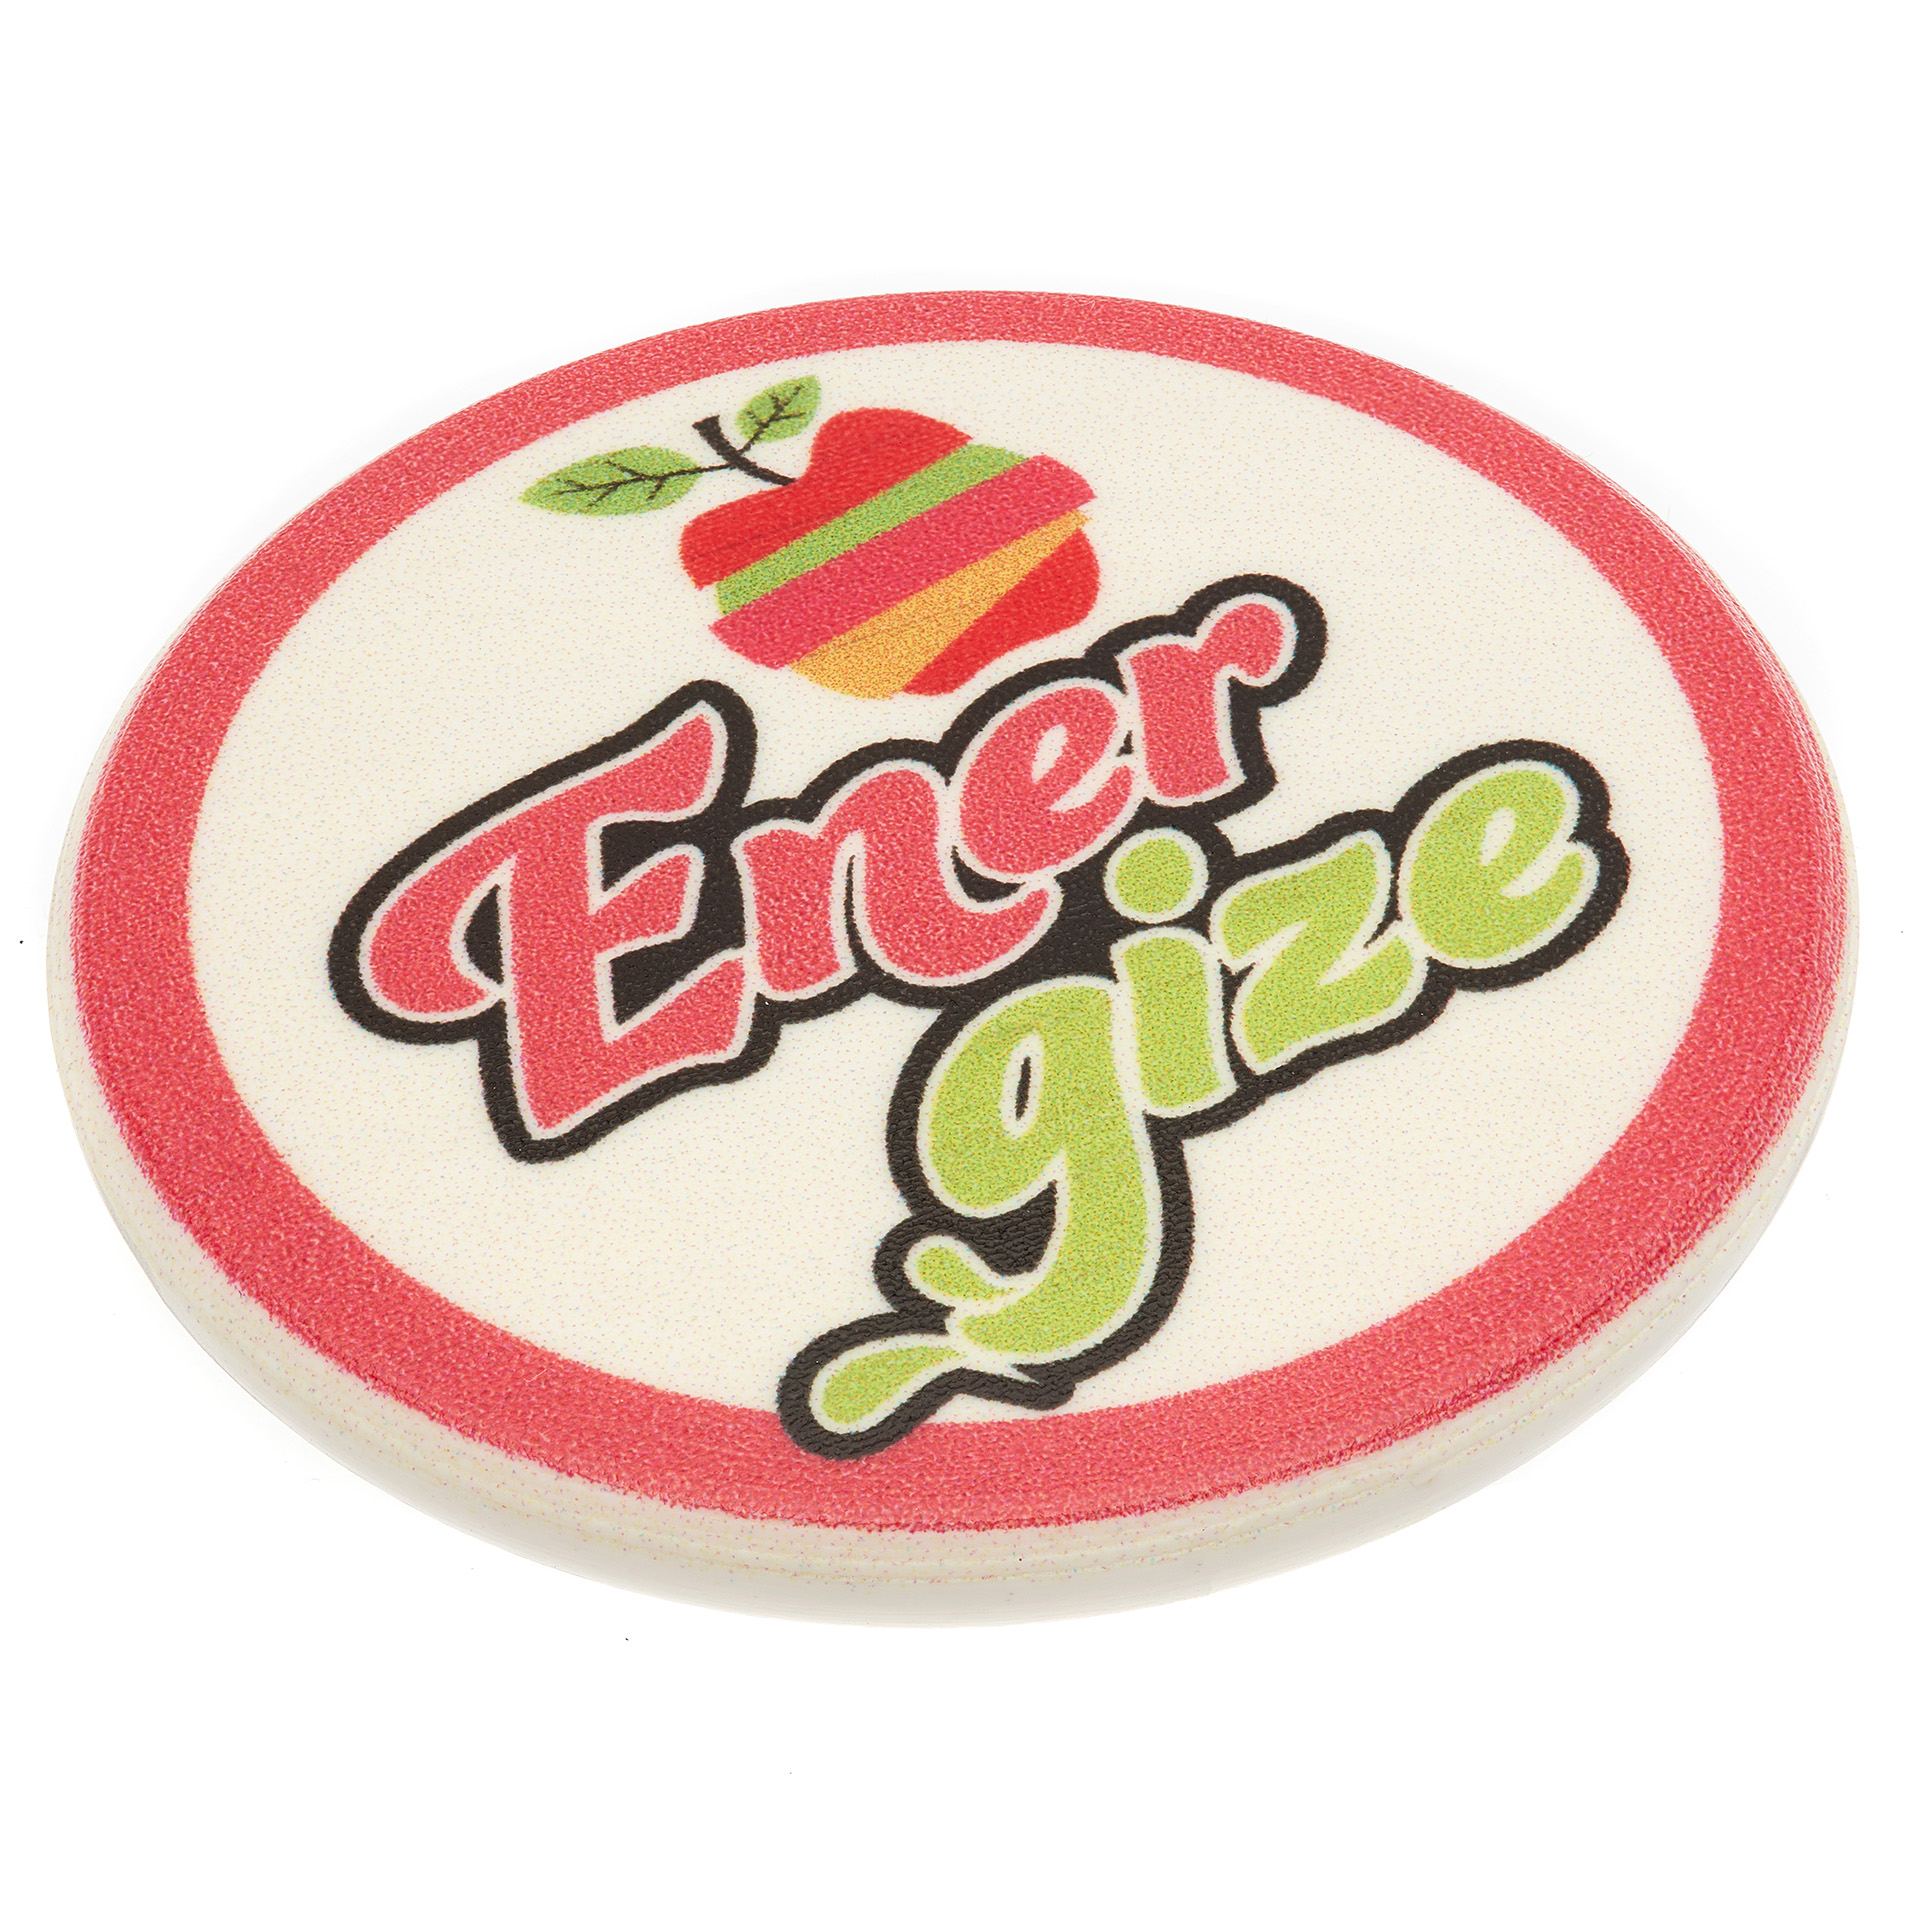 The Green & Good Button Badge is made from 100% recycled plastic. It comes with a digital print only and is available in white. It has a convex surface that looks just like a traditional button. Square or round option available.